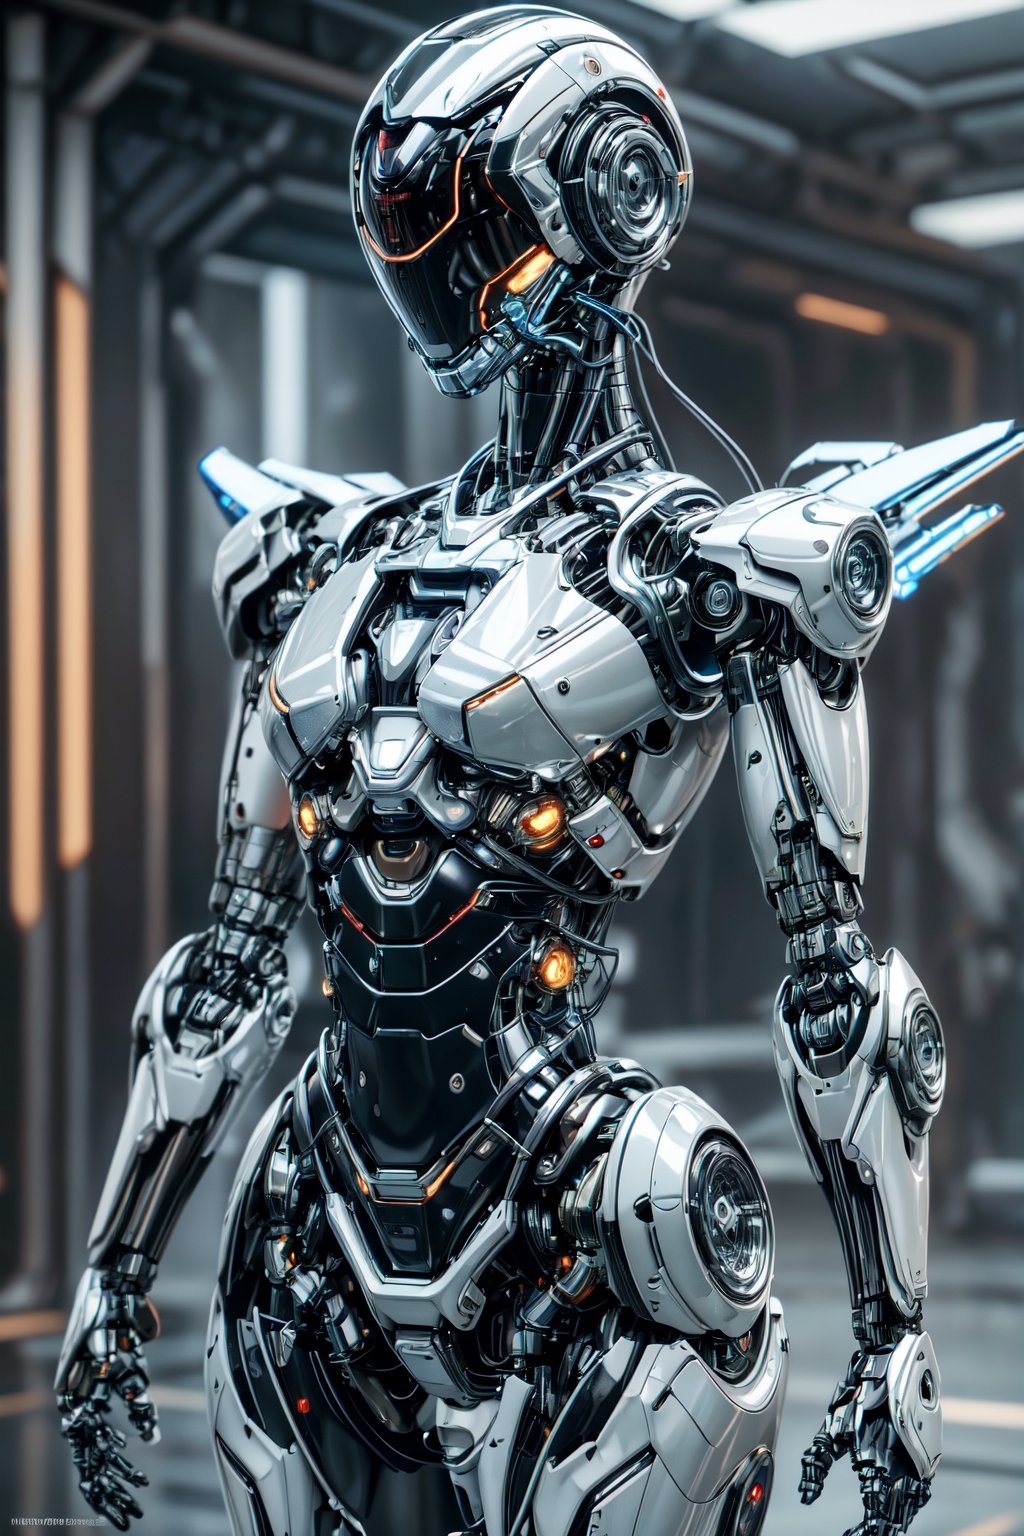 ((high resolution)), ((8K)), ((incredibly absurdres)), break. (super detailed metallic skin), (an extremely delicate and beautiful:1.3), break, ((1robot:1.5)), ((slender body)), (medium breasts), (beautiful hand), ((metallic body:1.3)), ((cyber helmet with full-face mask:1.4)), break. ((no hair:1.3)) , (blue glowing lines on one's body:1.2), break. ((intricate internal structure)), ((brighten parts:1.5)), break. ((robotic face:1.2)), (robotic arms), (robotic legs), (robotic hands), ((robotic joint:1.2)), (Cinematic angle), (ultra-fine quality), (masterpiece), (best quality), (incredibly absurdres), (highly detailed), high res, high detail eyes, high detail background, sharp focus, (photon mapping, radiosity, physically-based rendering, automatic white balance), masterpiece, best quality, ((Mecha body)), furure_urban, incredibly absurdres, science fiction, Fire Angel Mecha